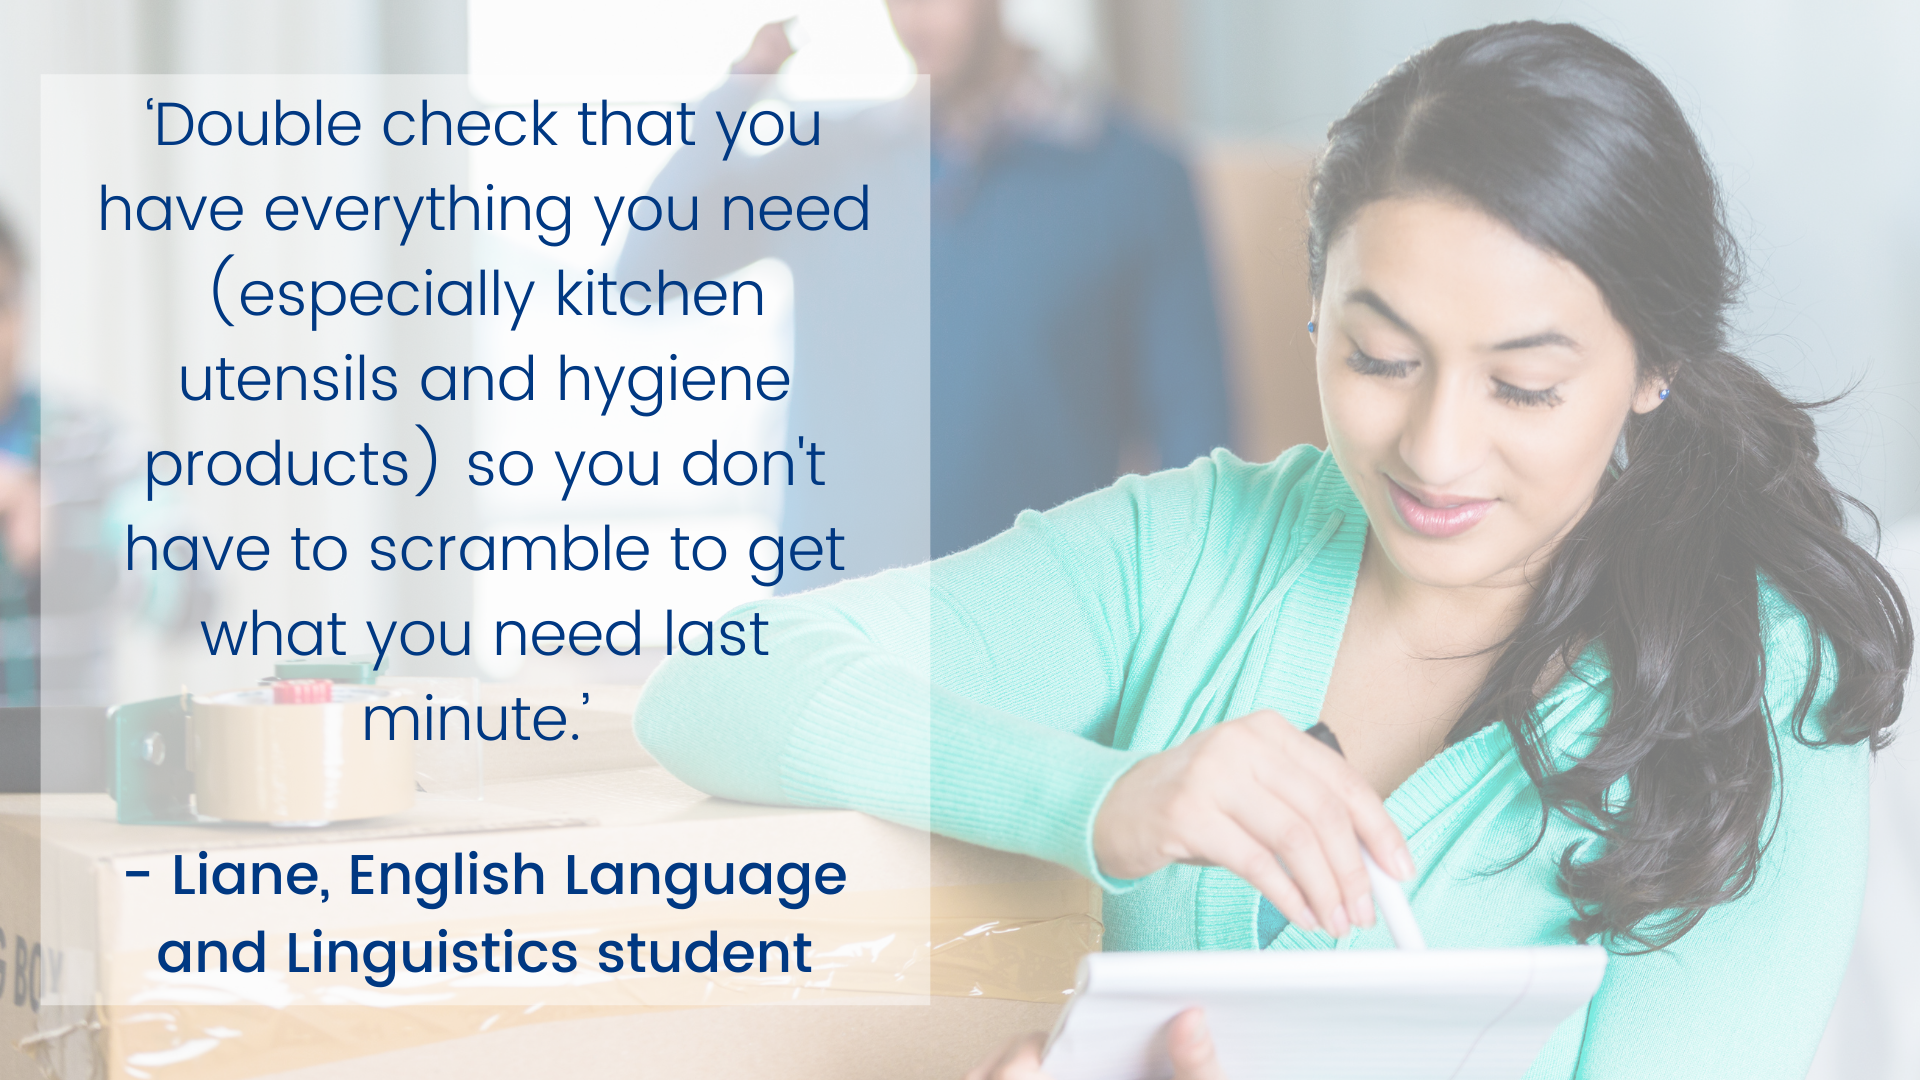 ‘Double check that you have everything you need (especially kitchen utensils and hygiene products) so you don't have to scramble to get what you need last minute.’ - Liane, English Language and Linguistics student